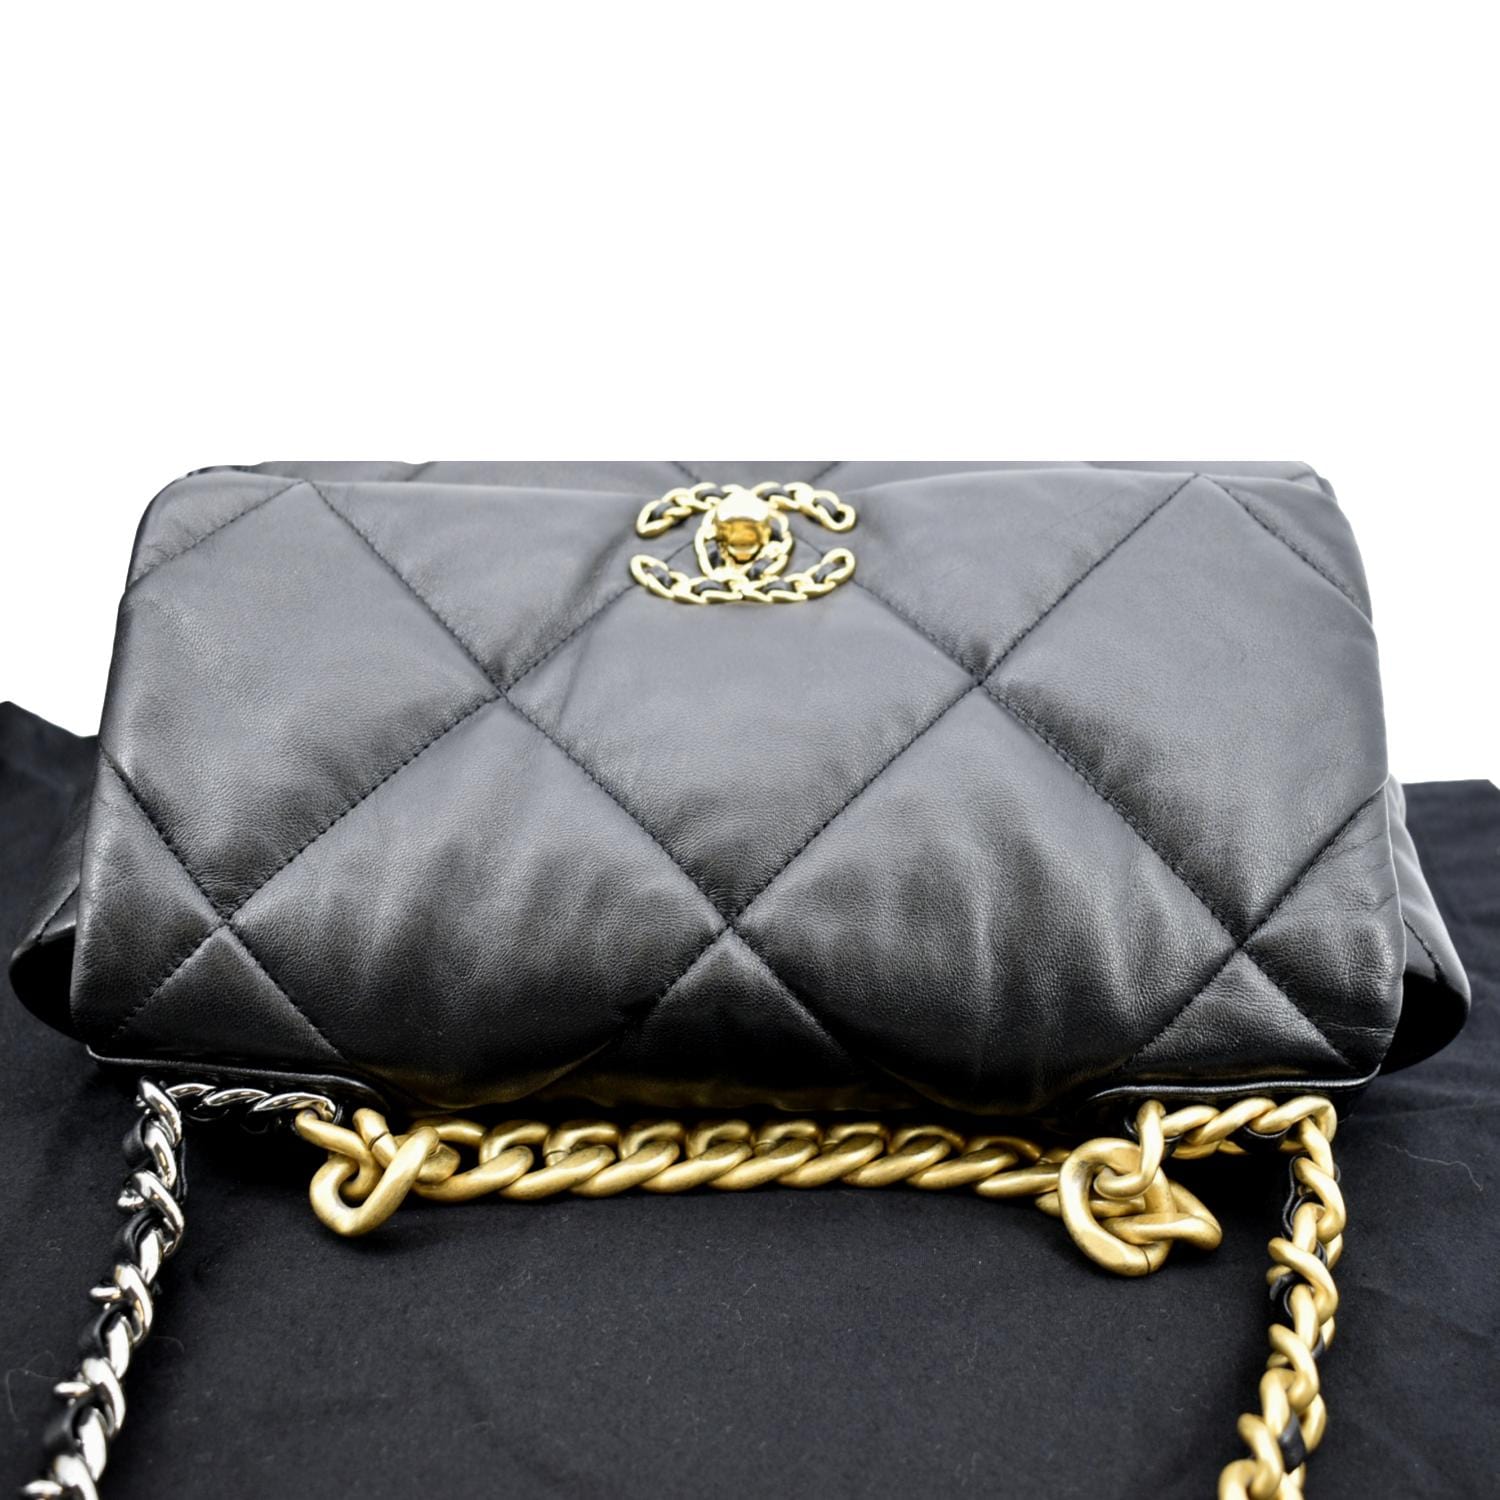 Chanel Black Lambskin Quilted Chanel 19 O Case